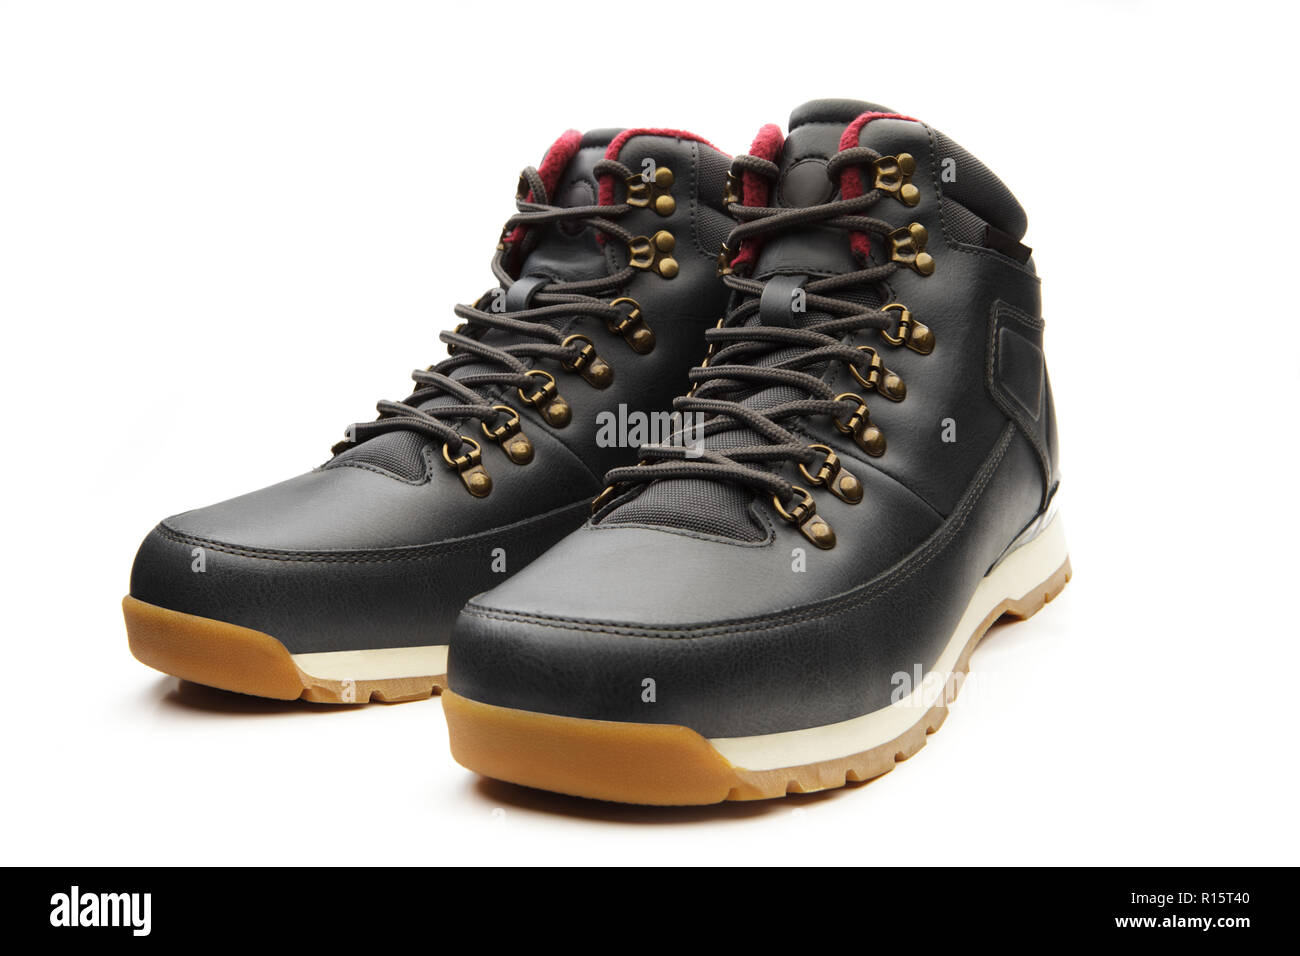 Timberland boots close up Cut Out Stock Images & Pictures - Alamy